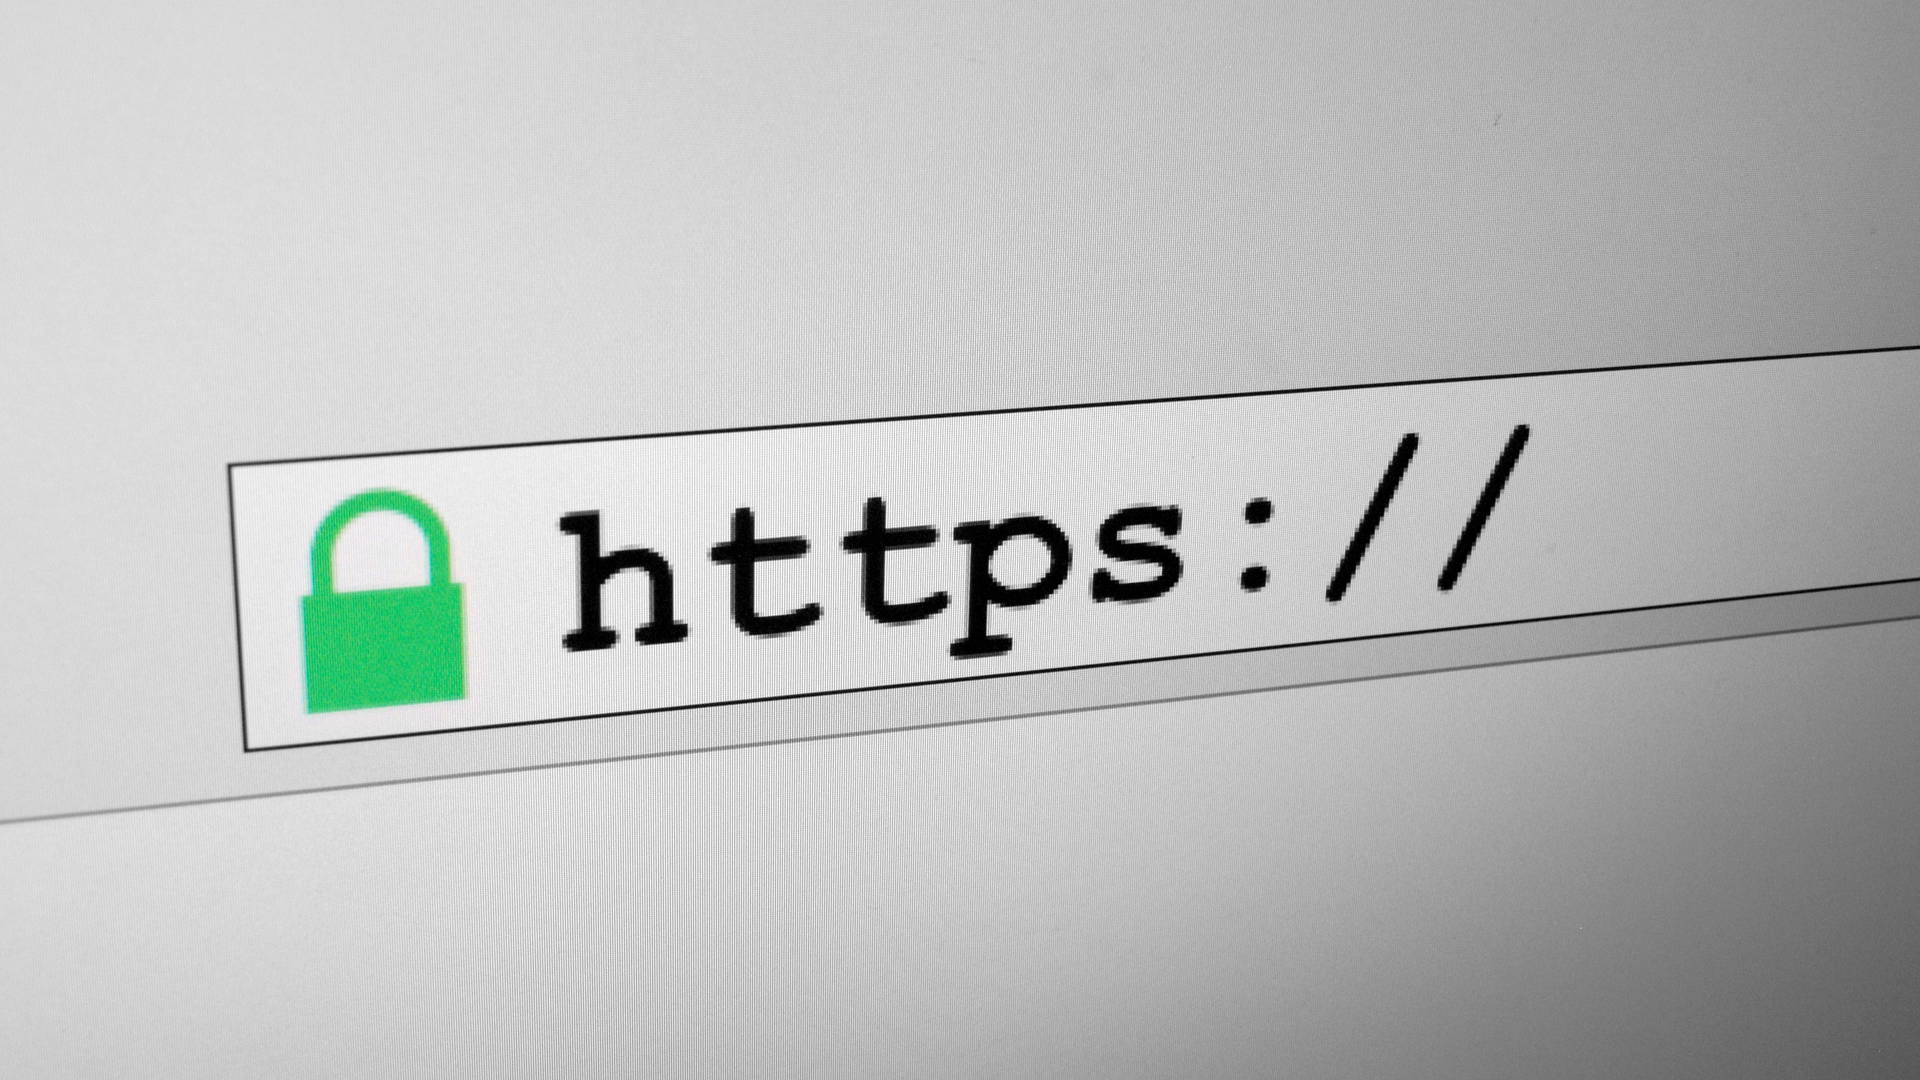 How to check if a website SSL certificate is valid with Bash